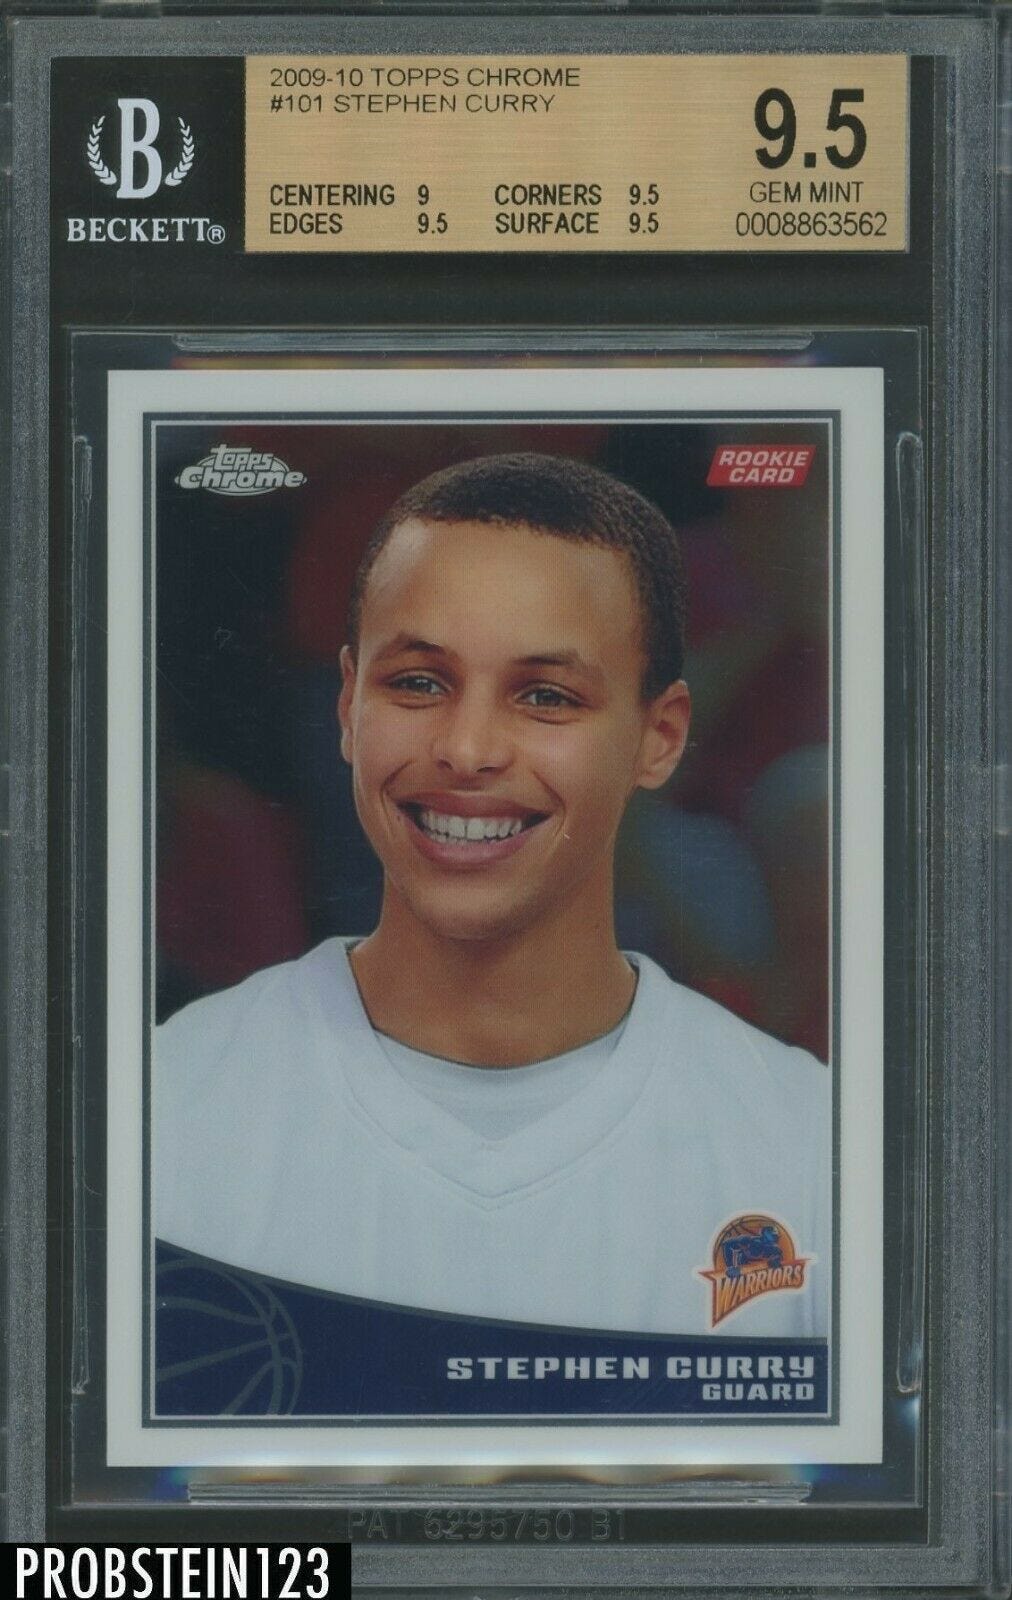 Image 1 - 2009-10-Topps-Chrome-101-Stephen-Curry-RC-Rookie-999-BGS-9-5-034-HIGH-END-034